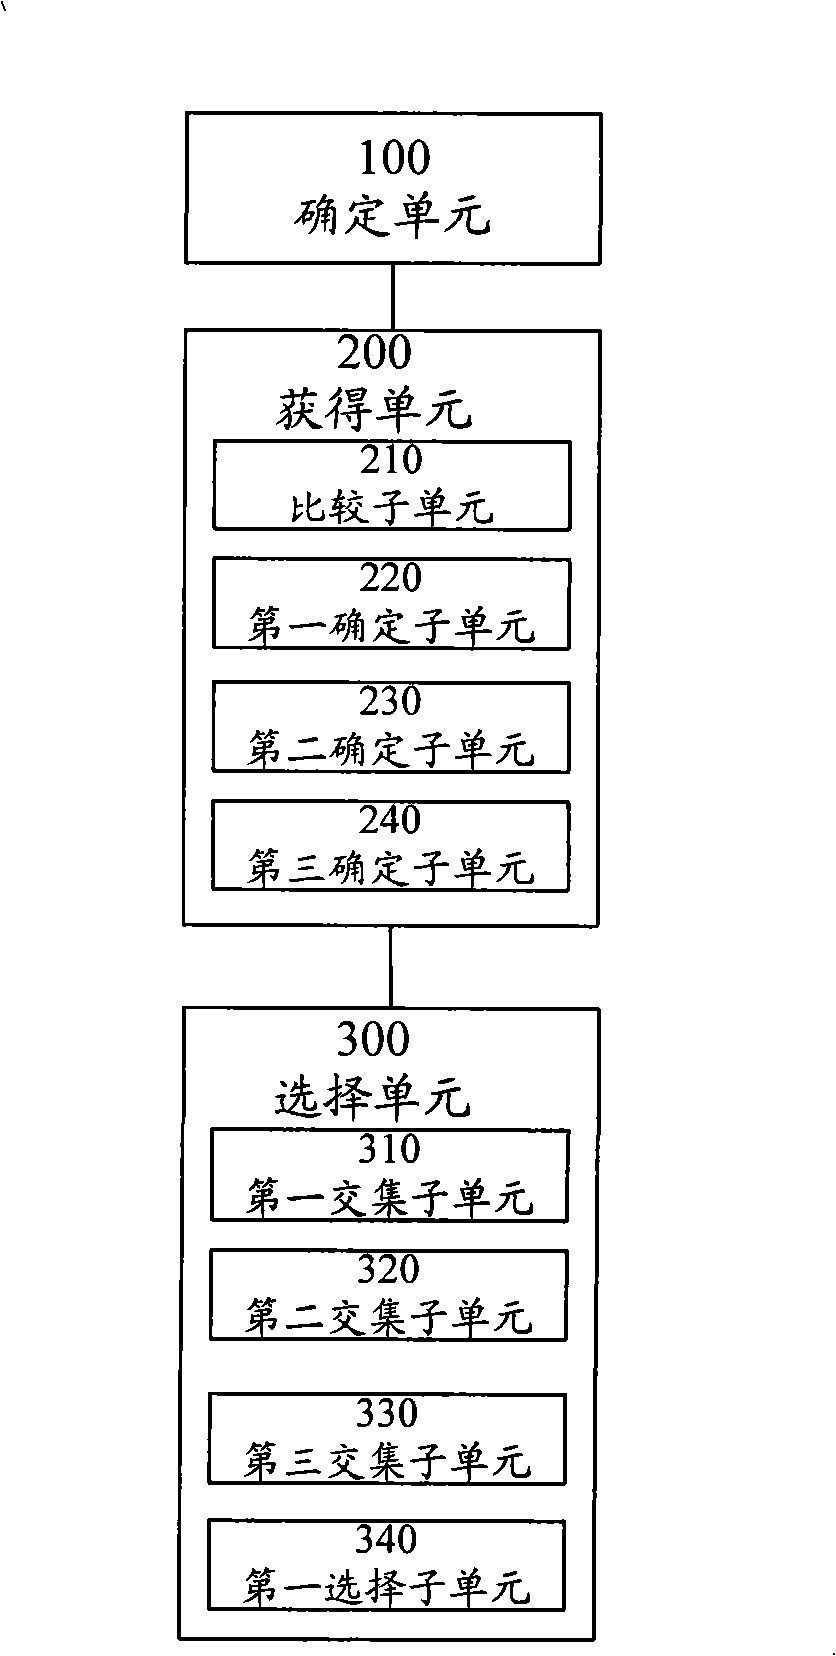 Method and apparatus for service transmission